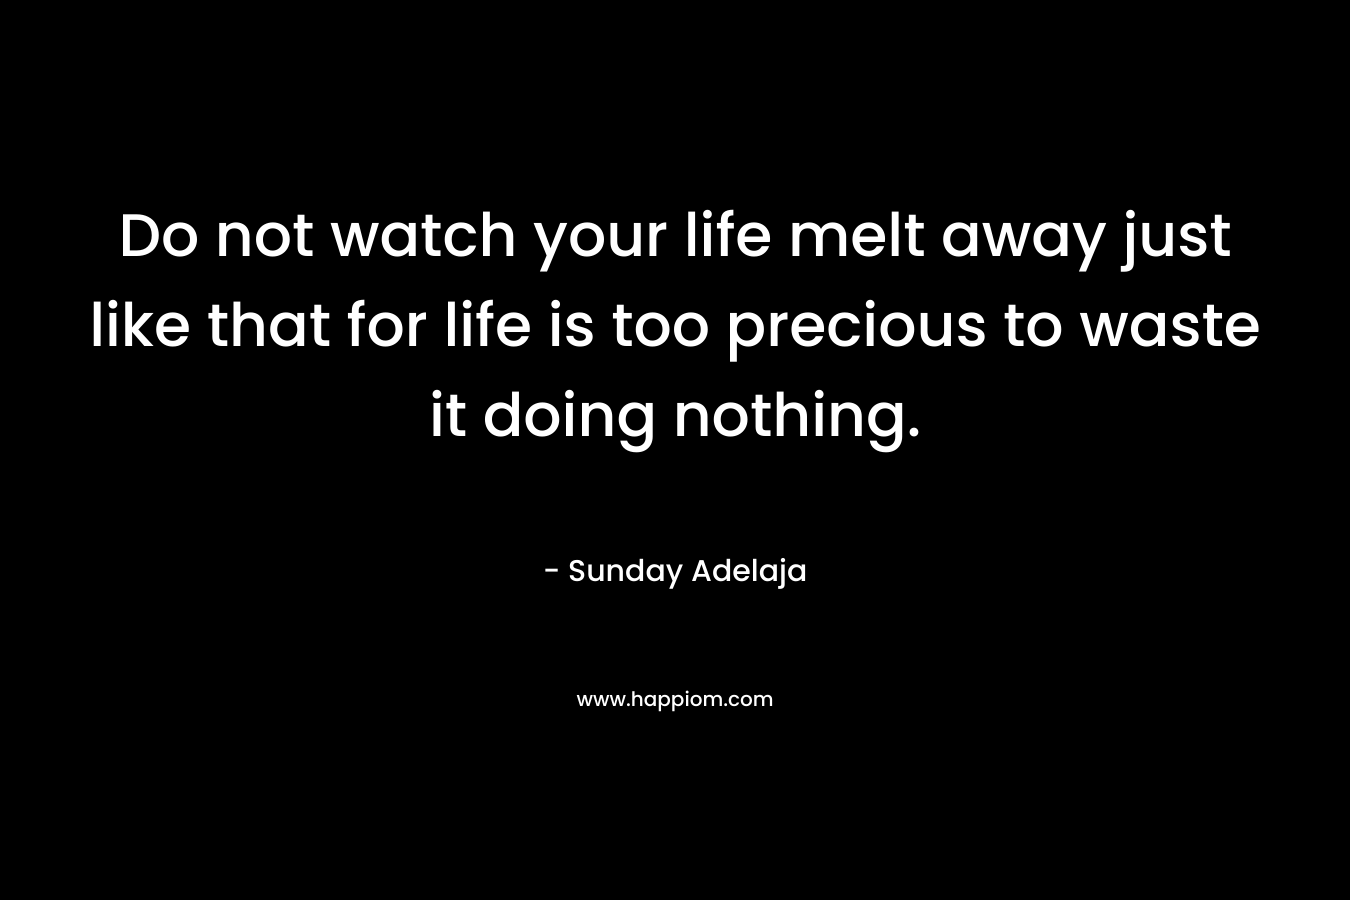 Do not watch your life melt away just like that for life is too precious to waste it doing nothing.